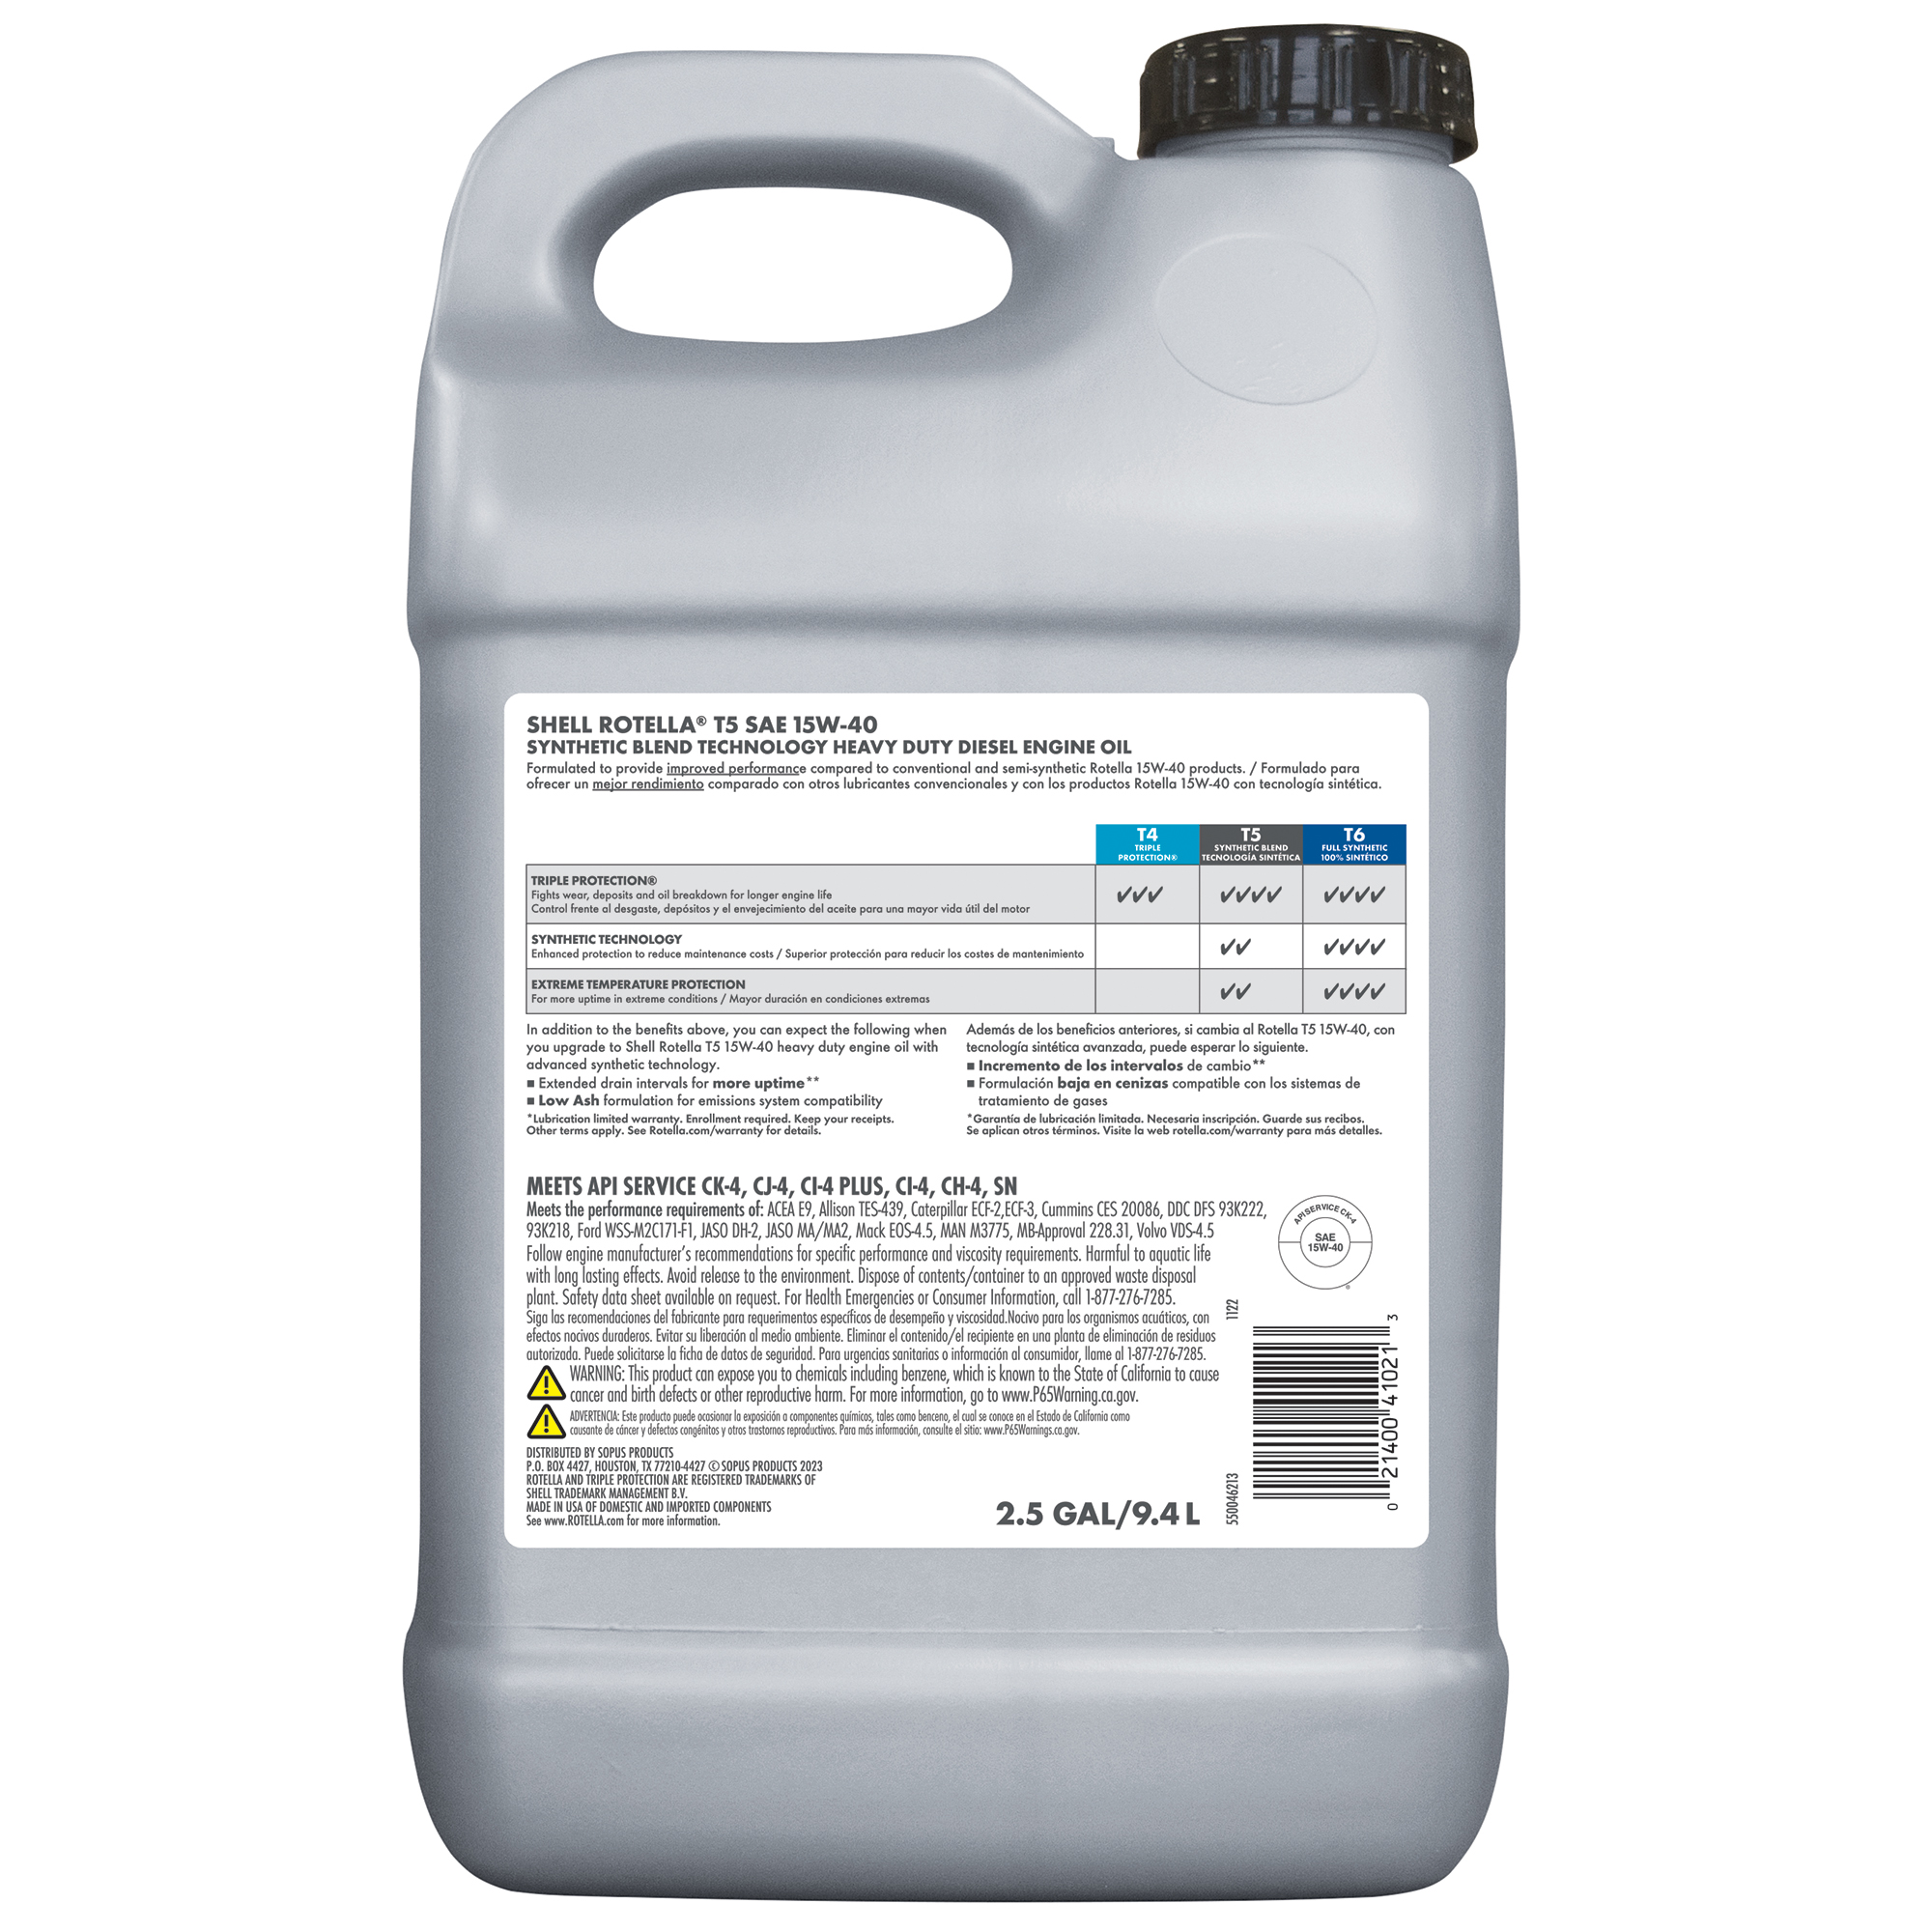 Shell Rotella T5 Synthetic Blend 15W-40 Diesel Engine Oil, 2.5 Gallon - image 2 of 9